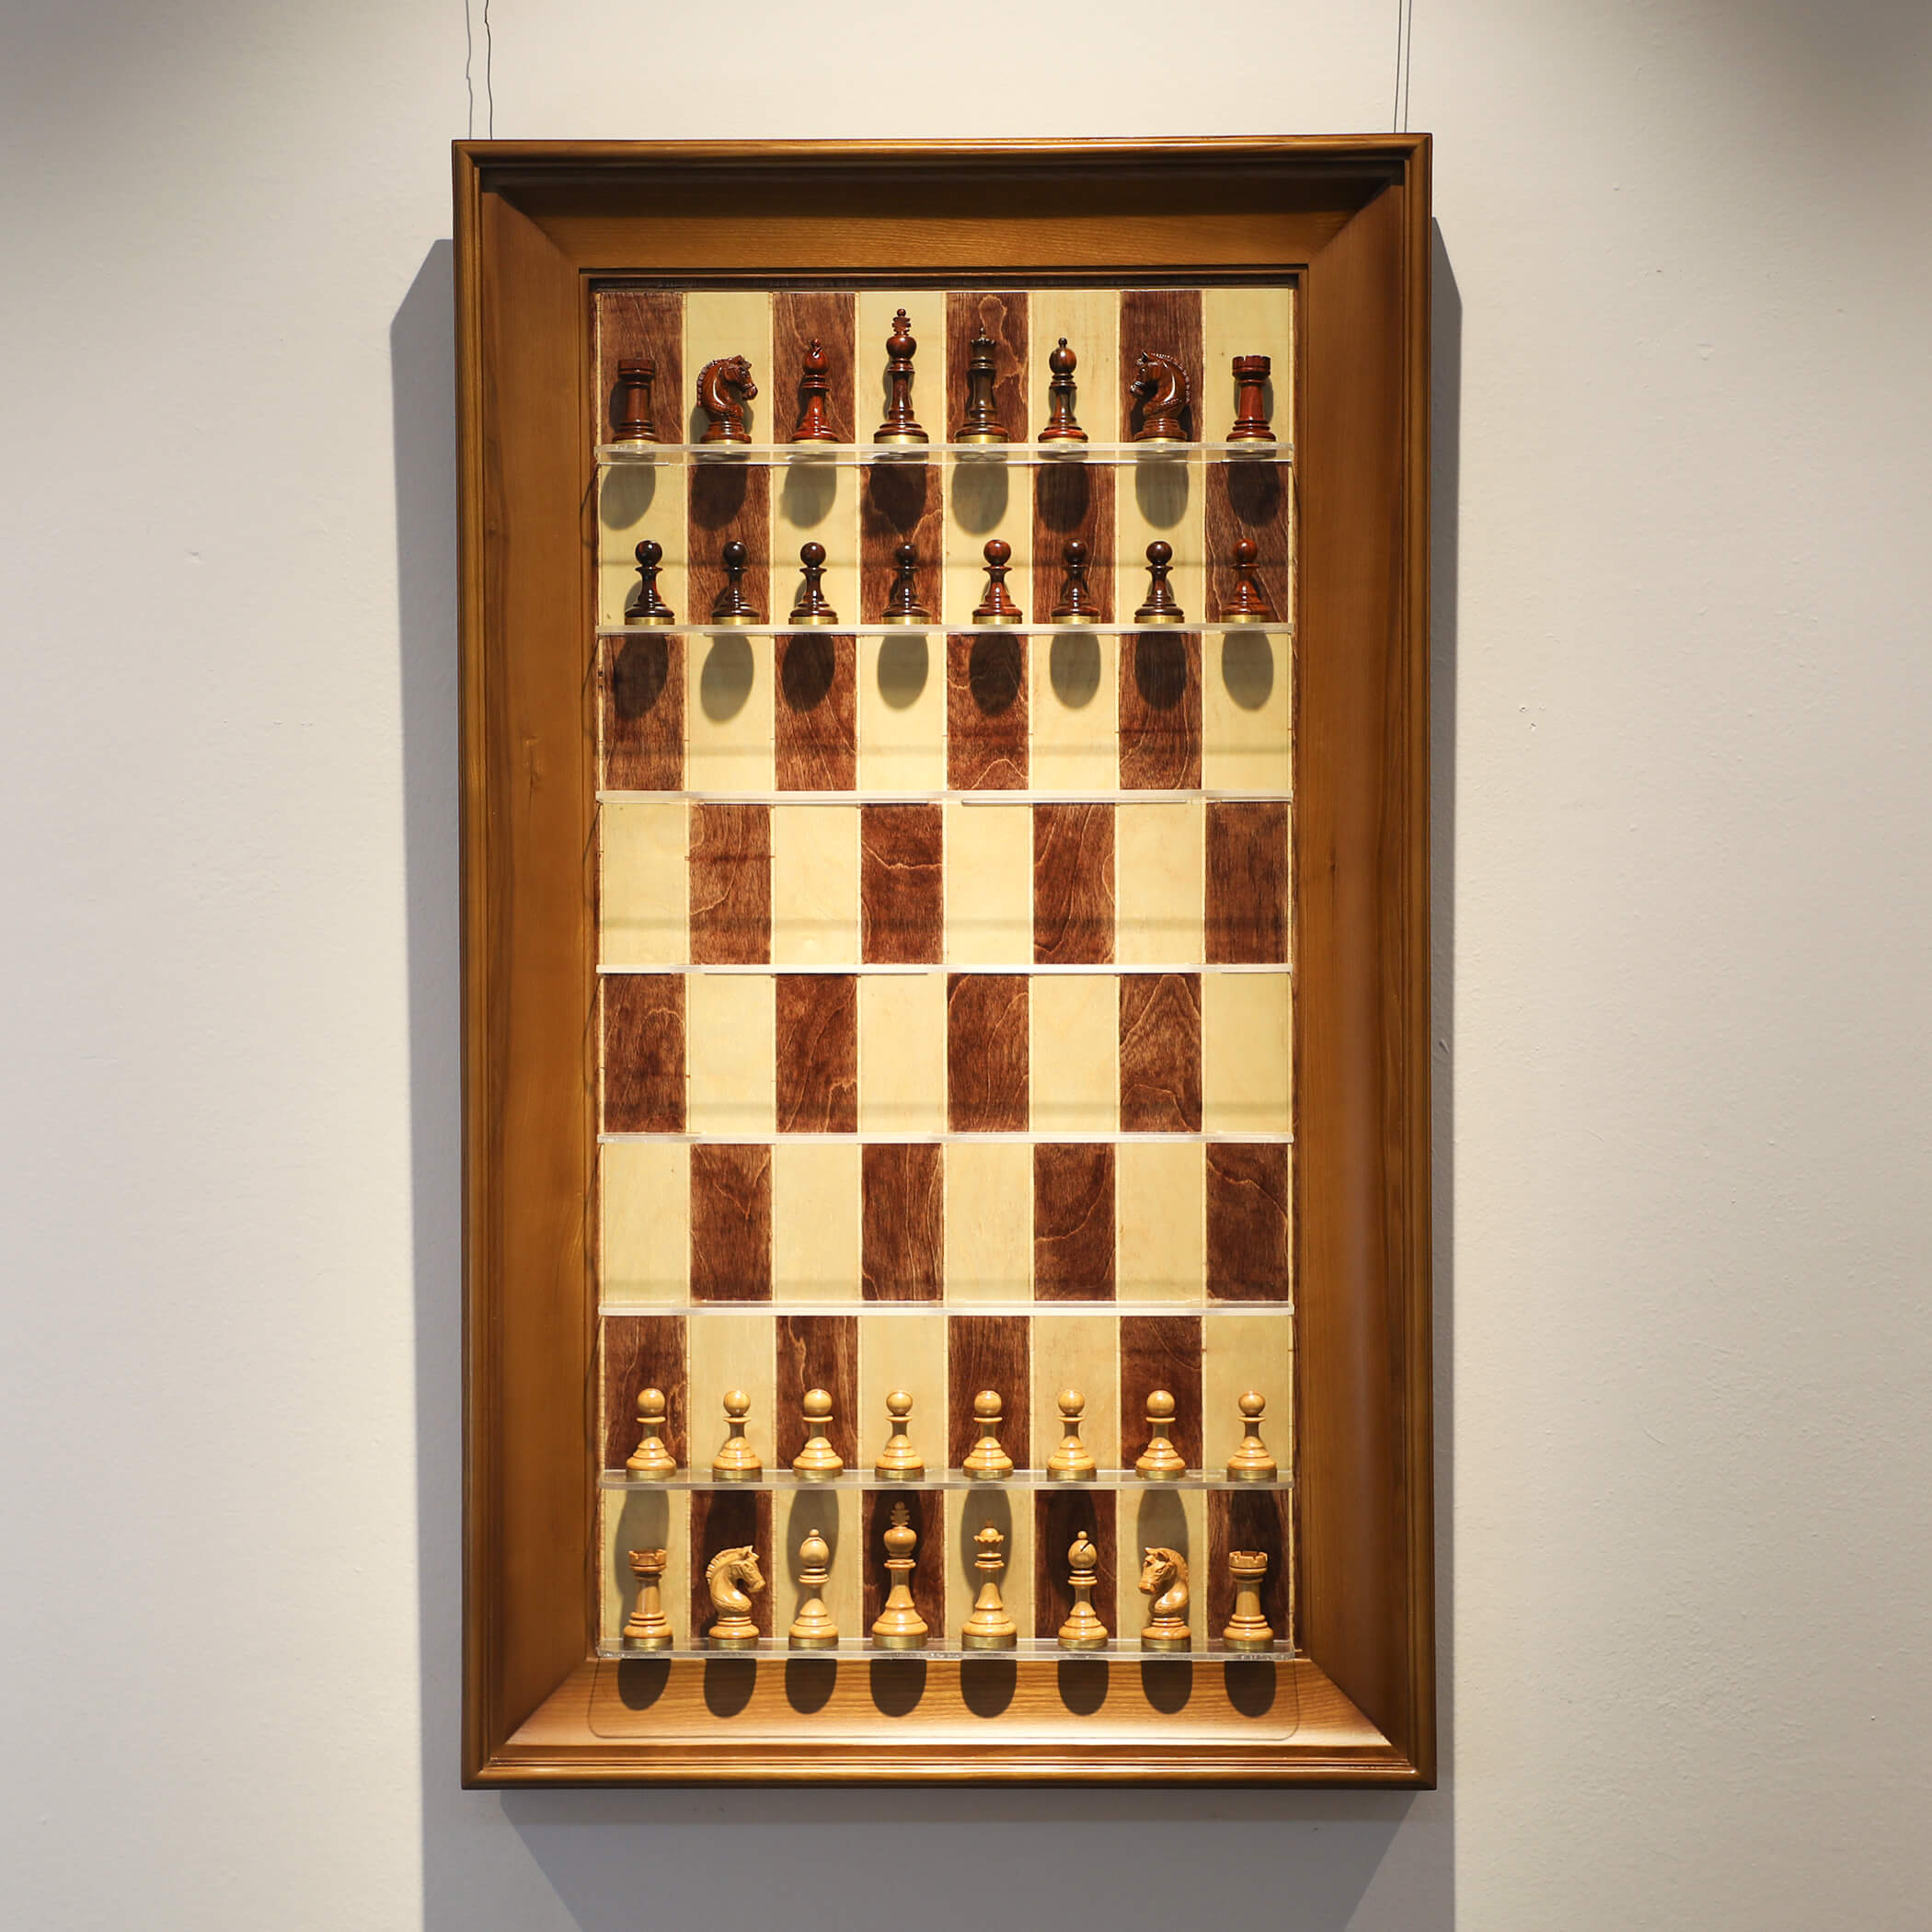 High End Vertical Chess Sets - Henry Le Chess Sets